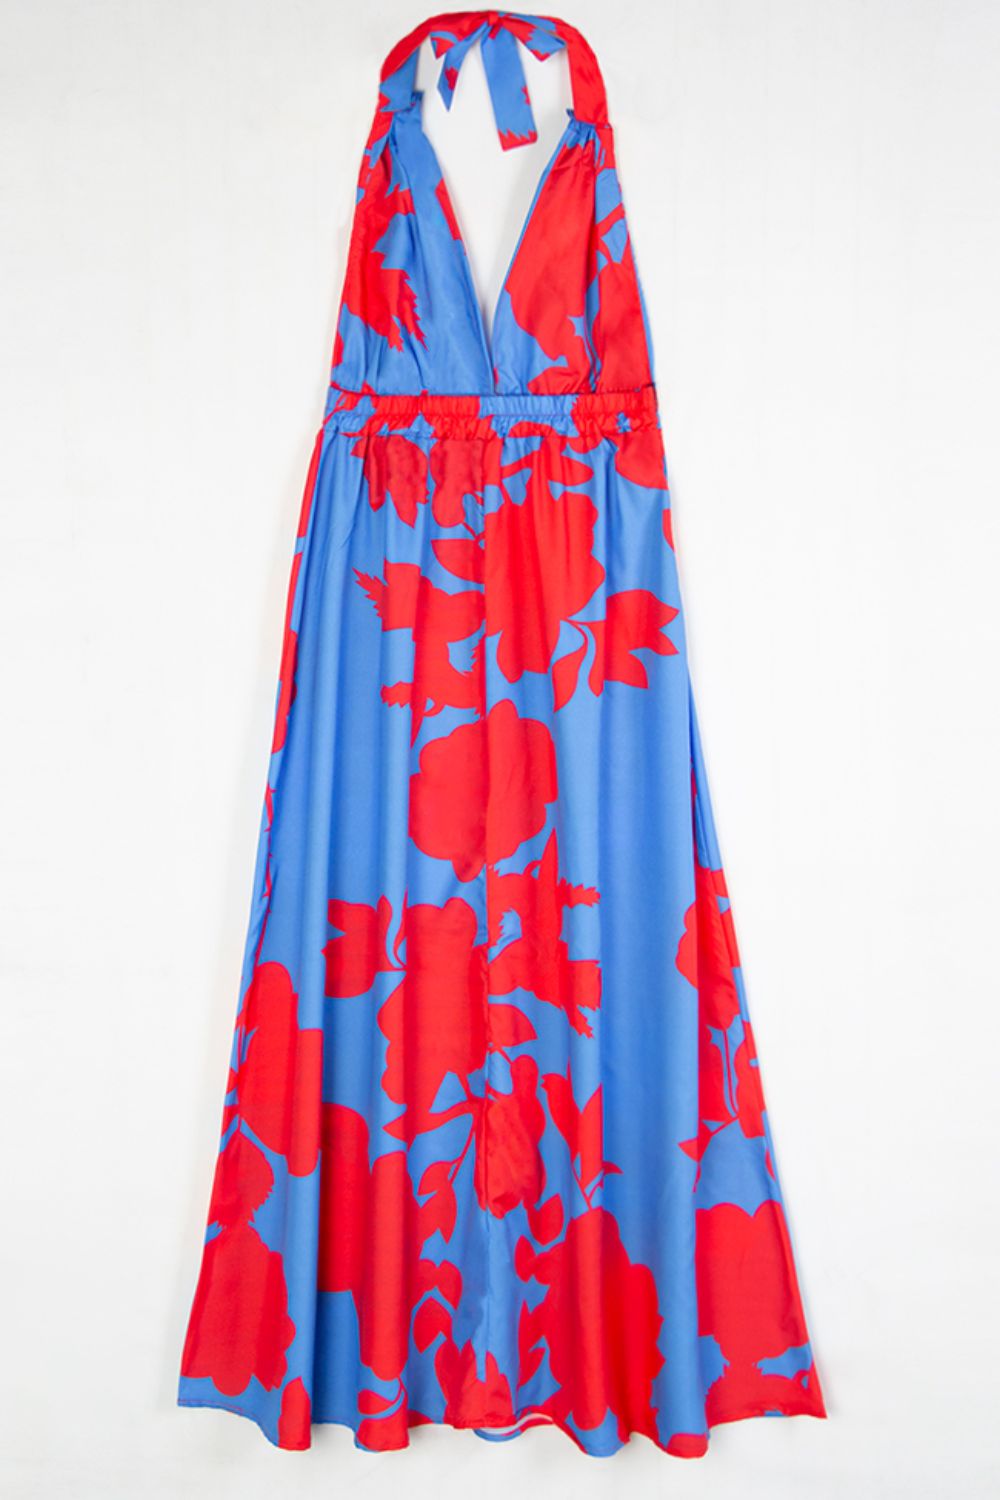 Contrast Halter Neck Maxi Dress Print on any thing USA/STOD clothes